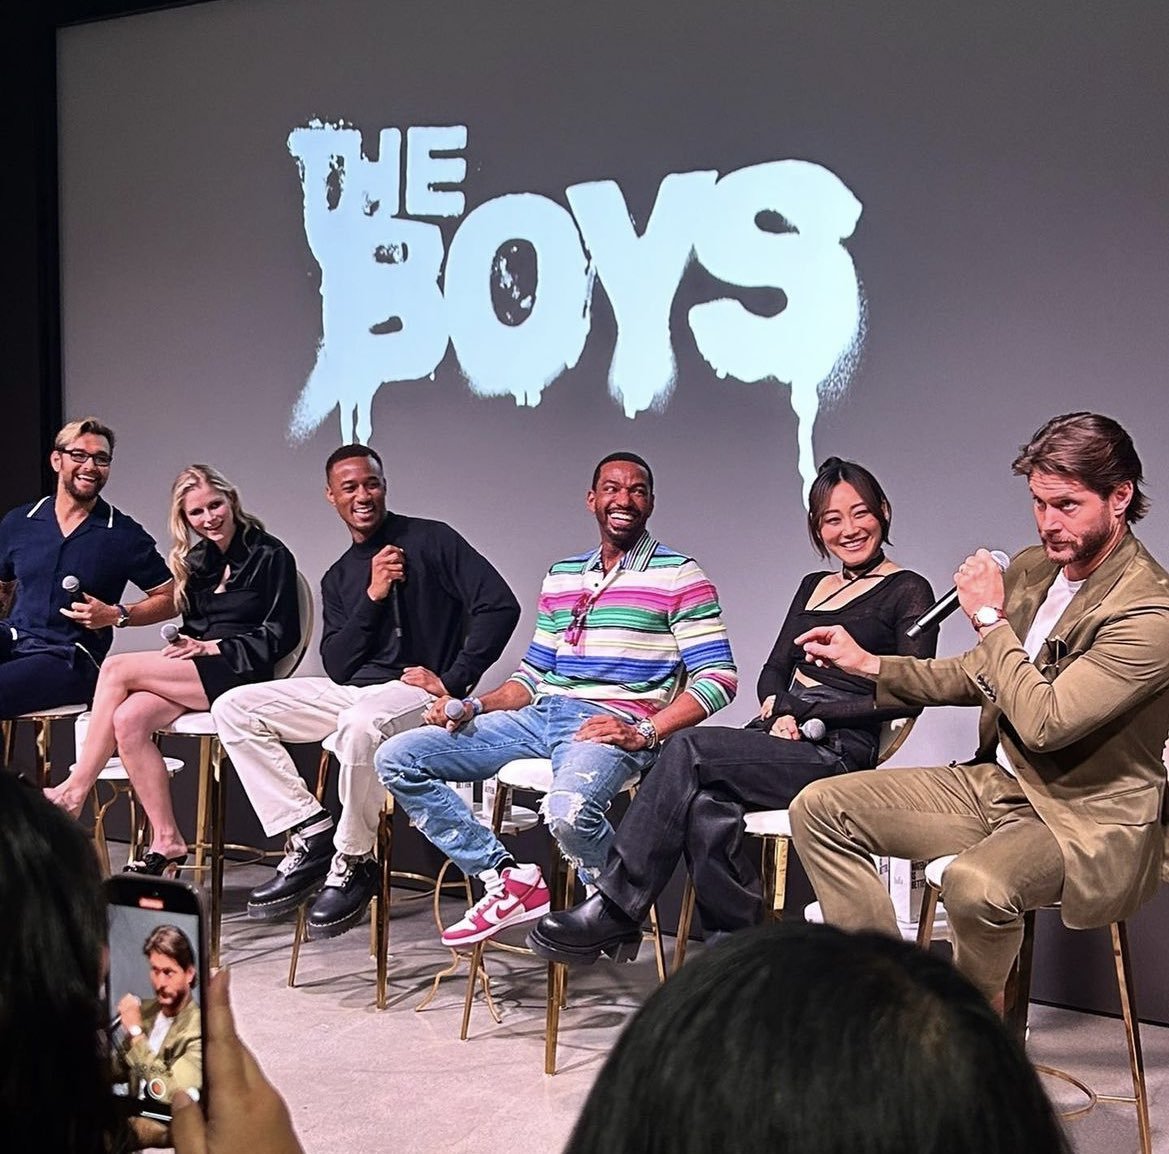 I can't get over how every. single. cast. member. is looking at Mr. Ackles in this shot. <3

#PrimeFYC #ConsiderTheBoys 

(Photo source: instagram.com/p/CshW6cpSGc2/…)